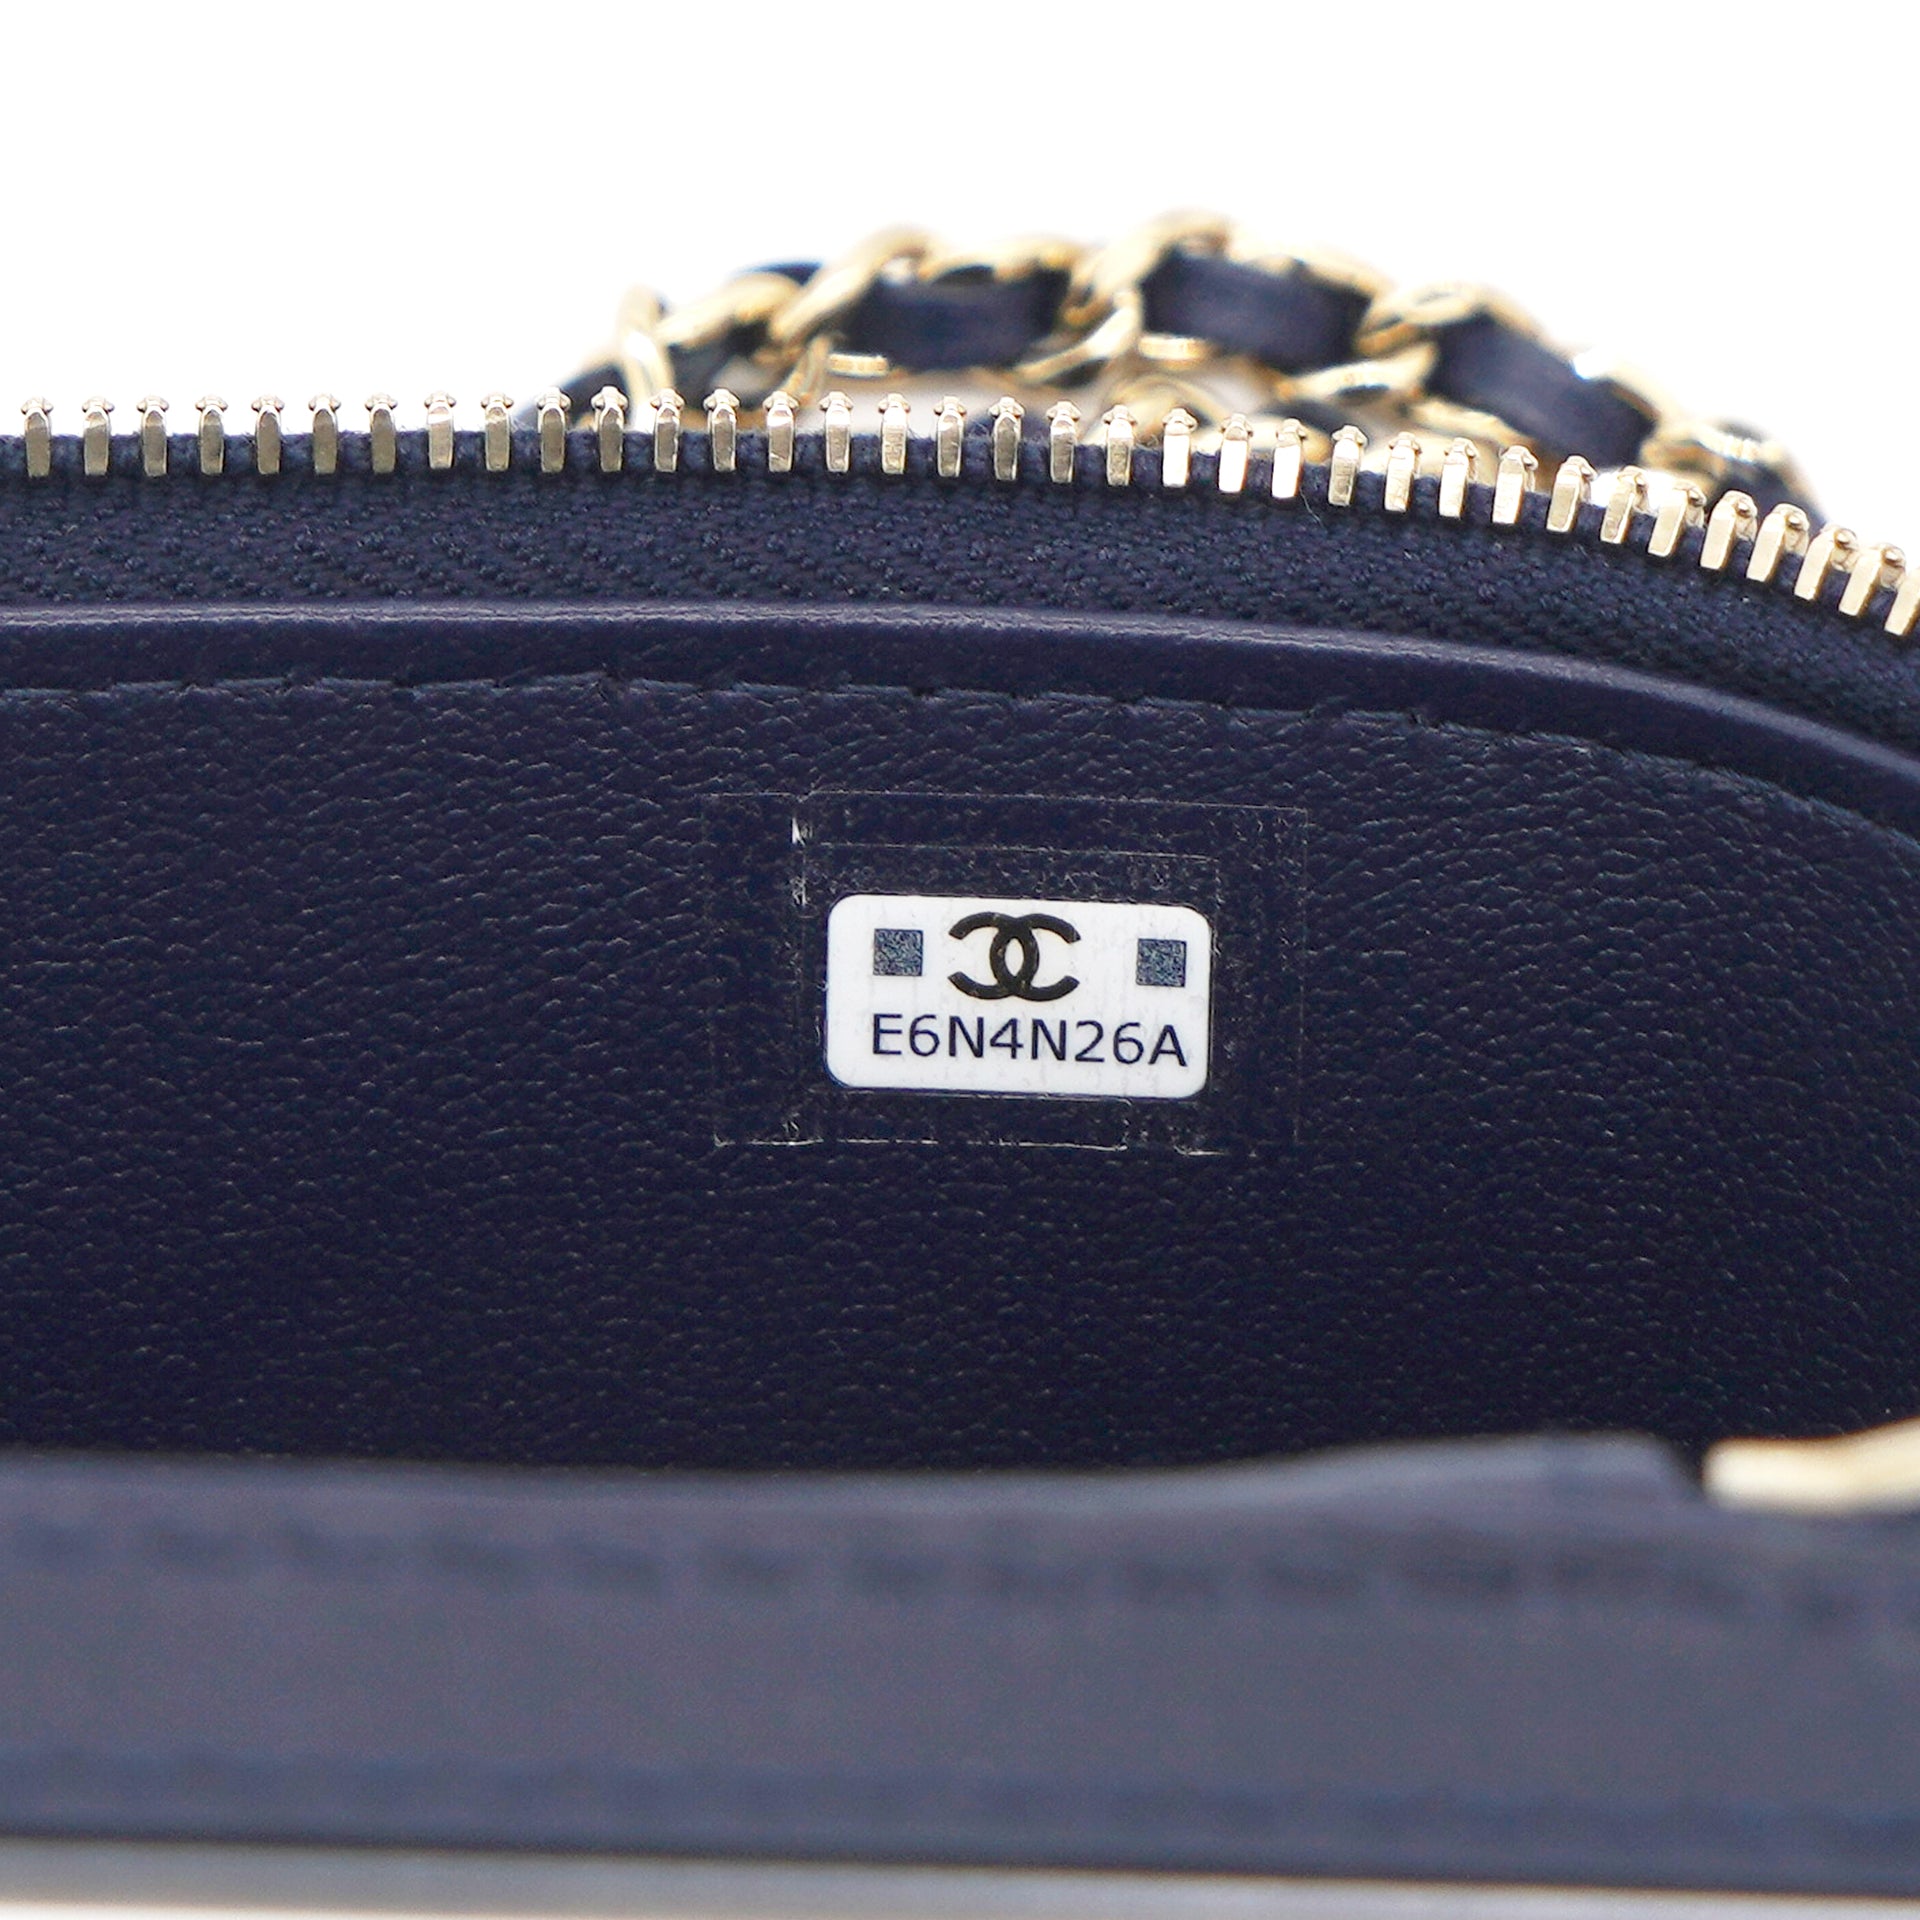 chanel vanity case navy blue leather